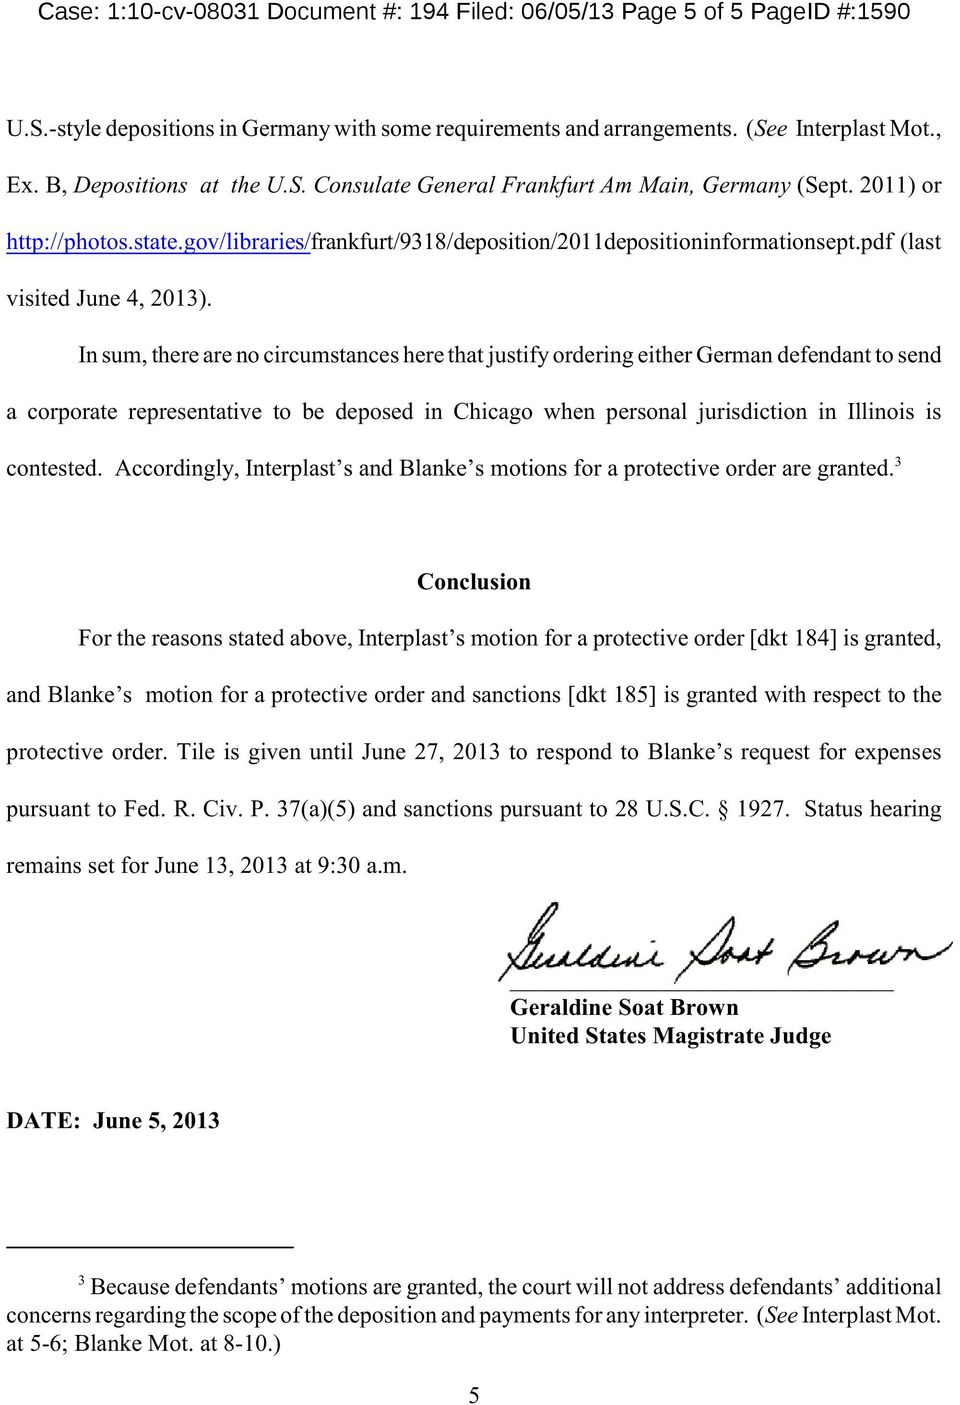 In sum, there are no circumstances here that justify ordering either German defendant to send a corporate representative to be deposed in Chicago when personal jurisdiction in Illinois is contested.